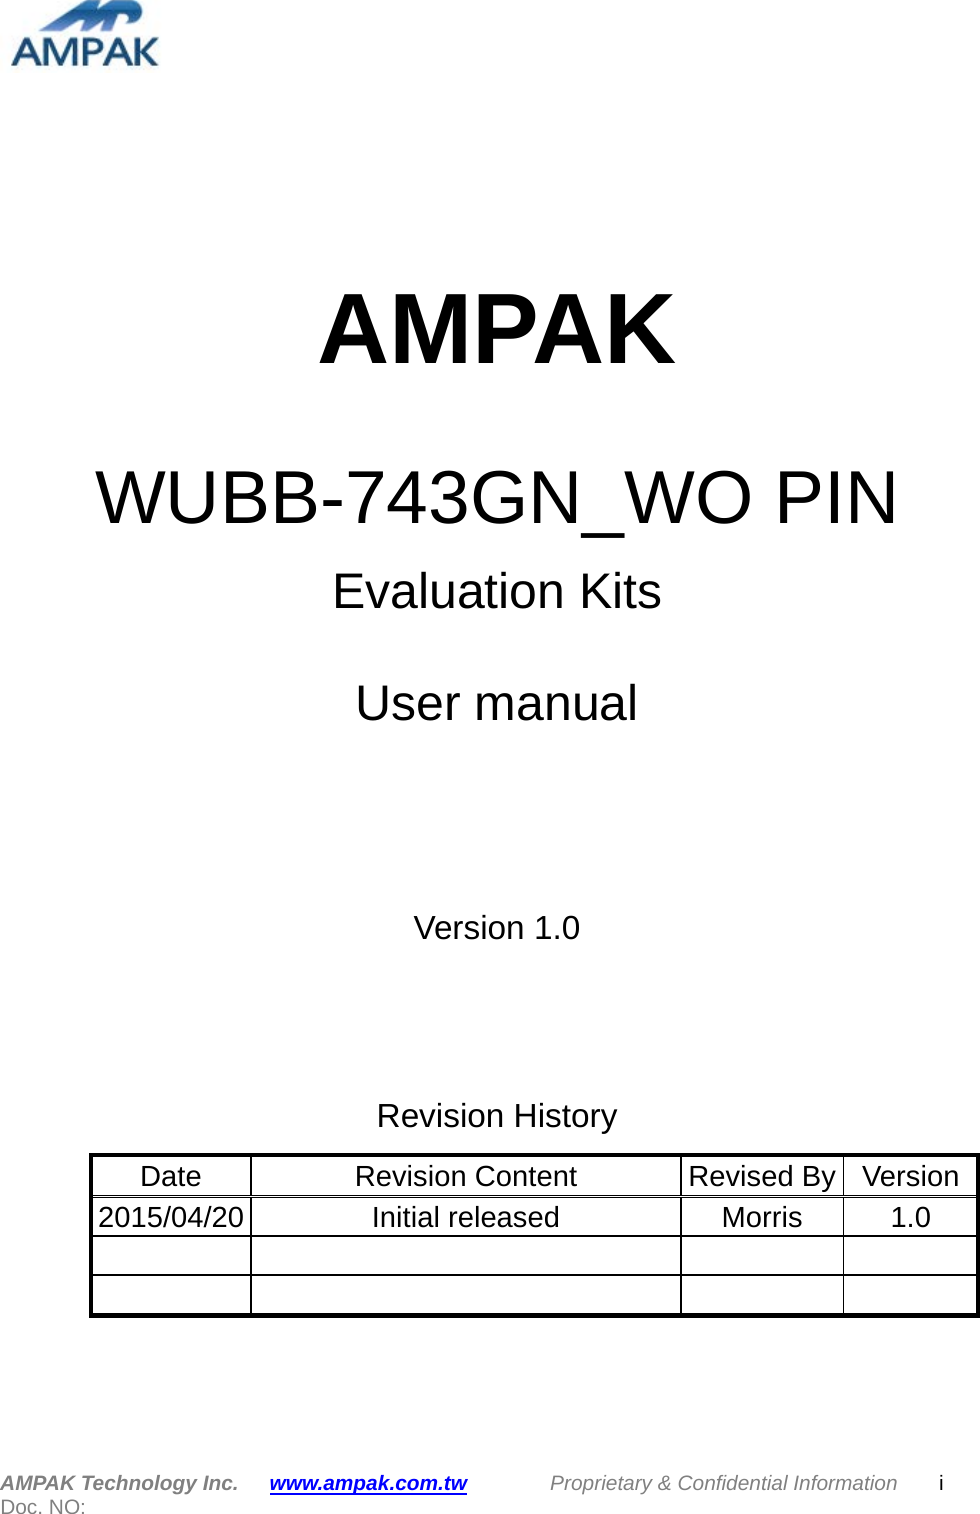        AMPAK  WUBB-743GN_WO PIN Evaluation Kits  User manual   Version 1.0      Revision History Date Revision Content Revised By Version 2015/04/20 Initial released   Morris 1.0           AMPAK Technology Inc.   www.ampak.com.tw        Proprietary &amp; Confidential Information    i Doc. NO:   